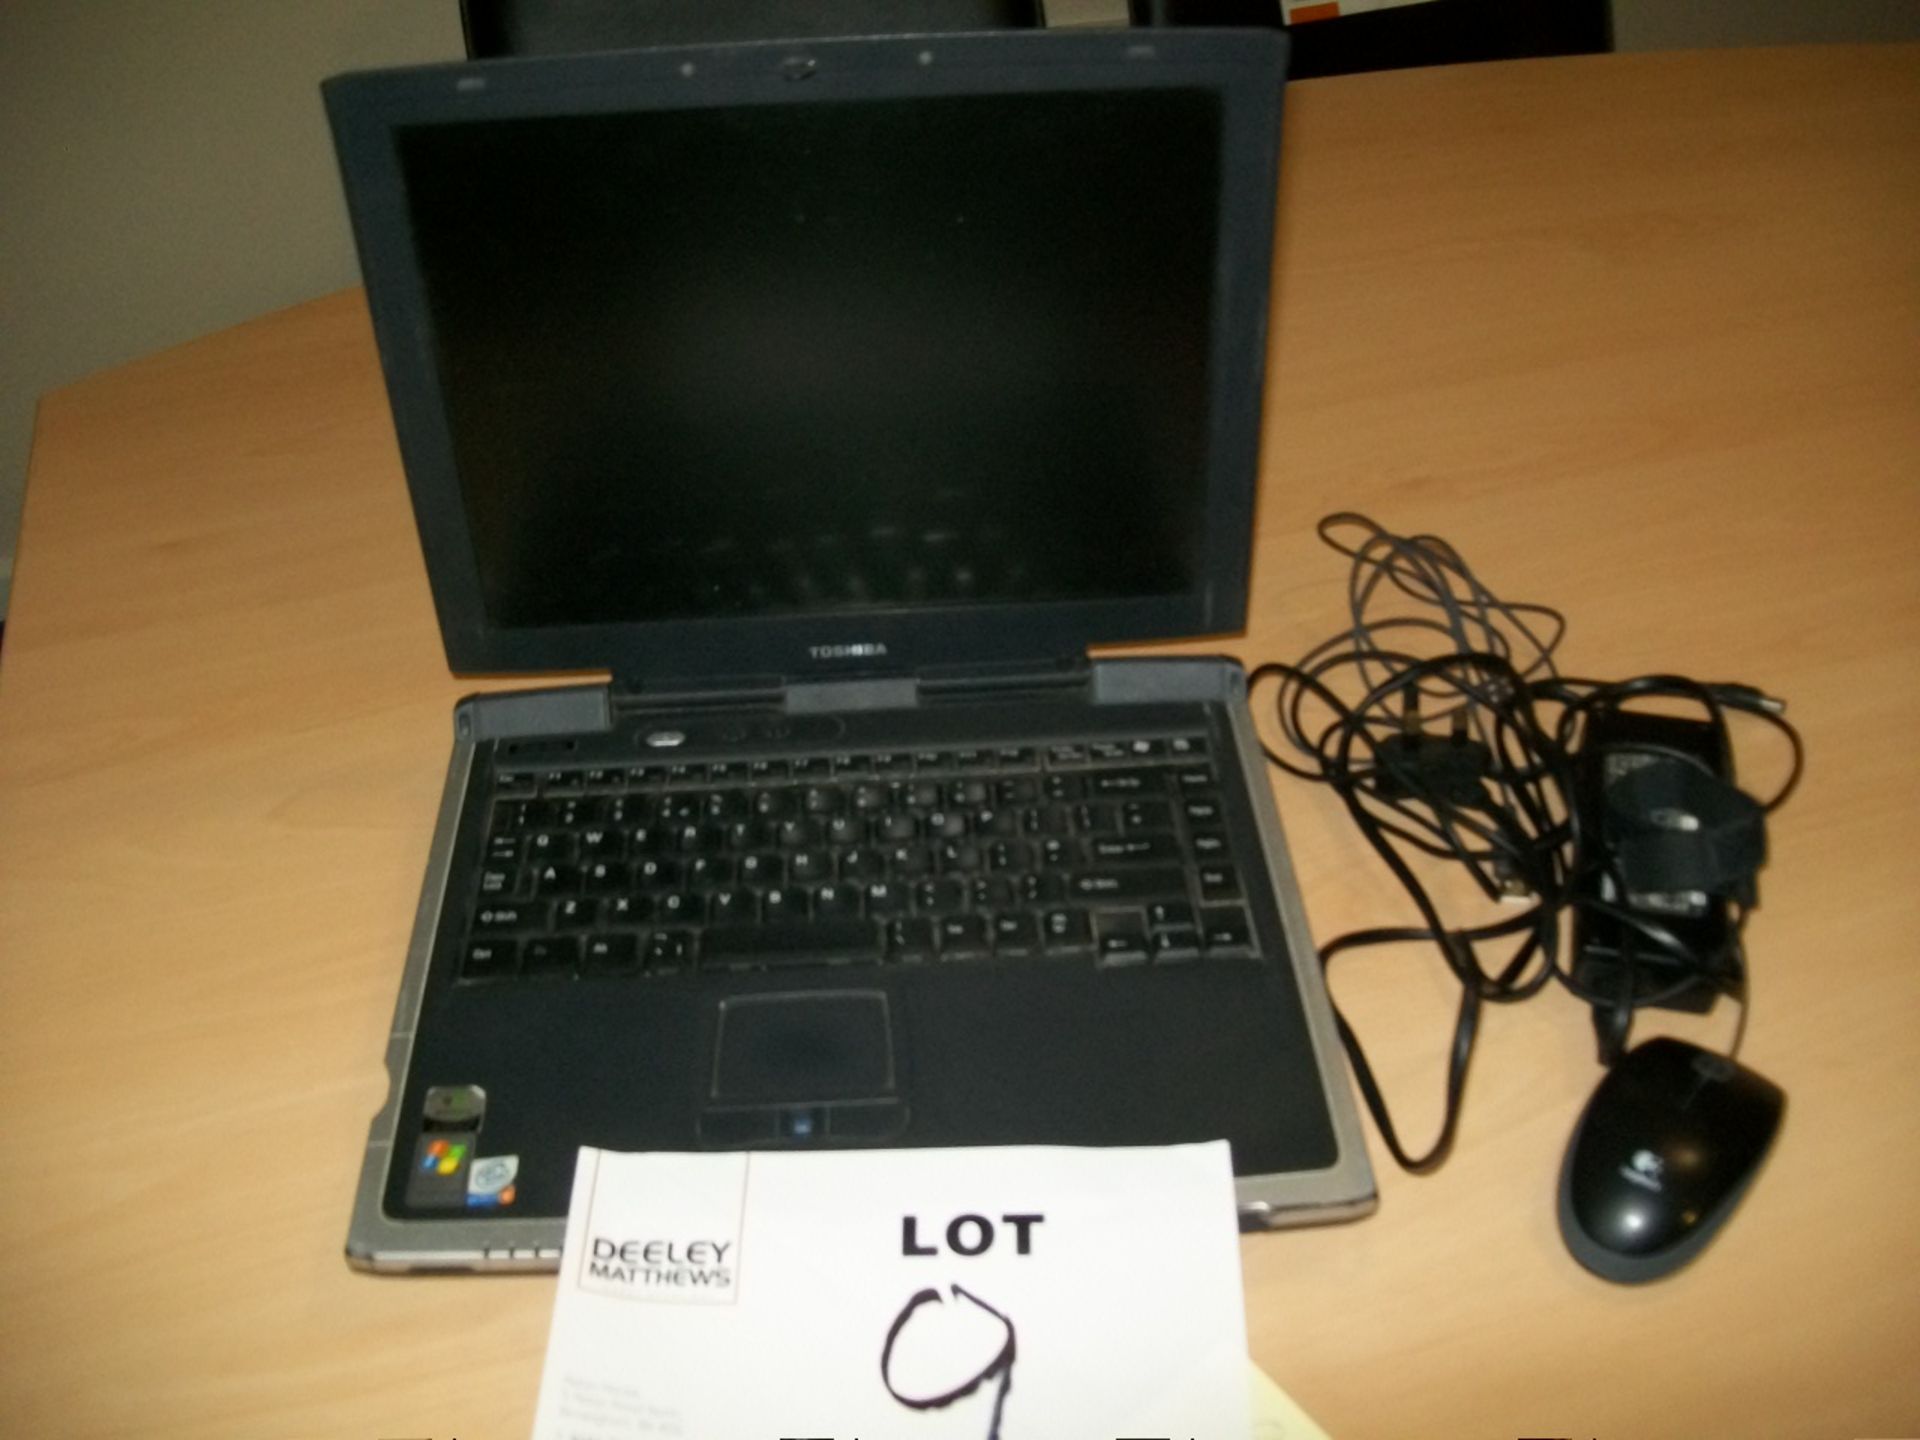 Toshiba S2410 LAPTOP computer, Pentium 4 processor, power lead and mouse